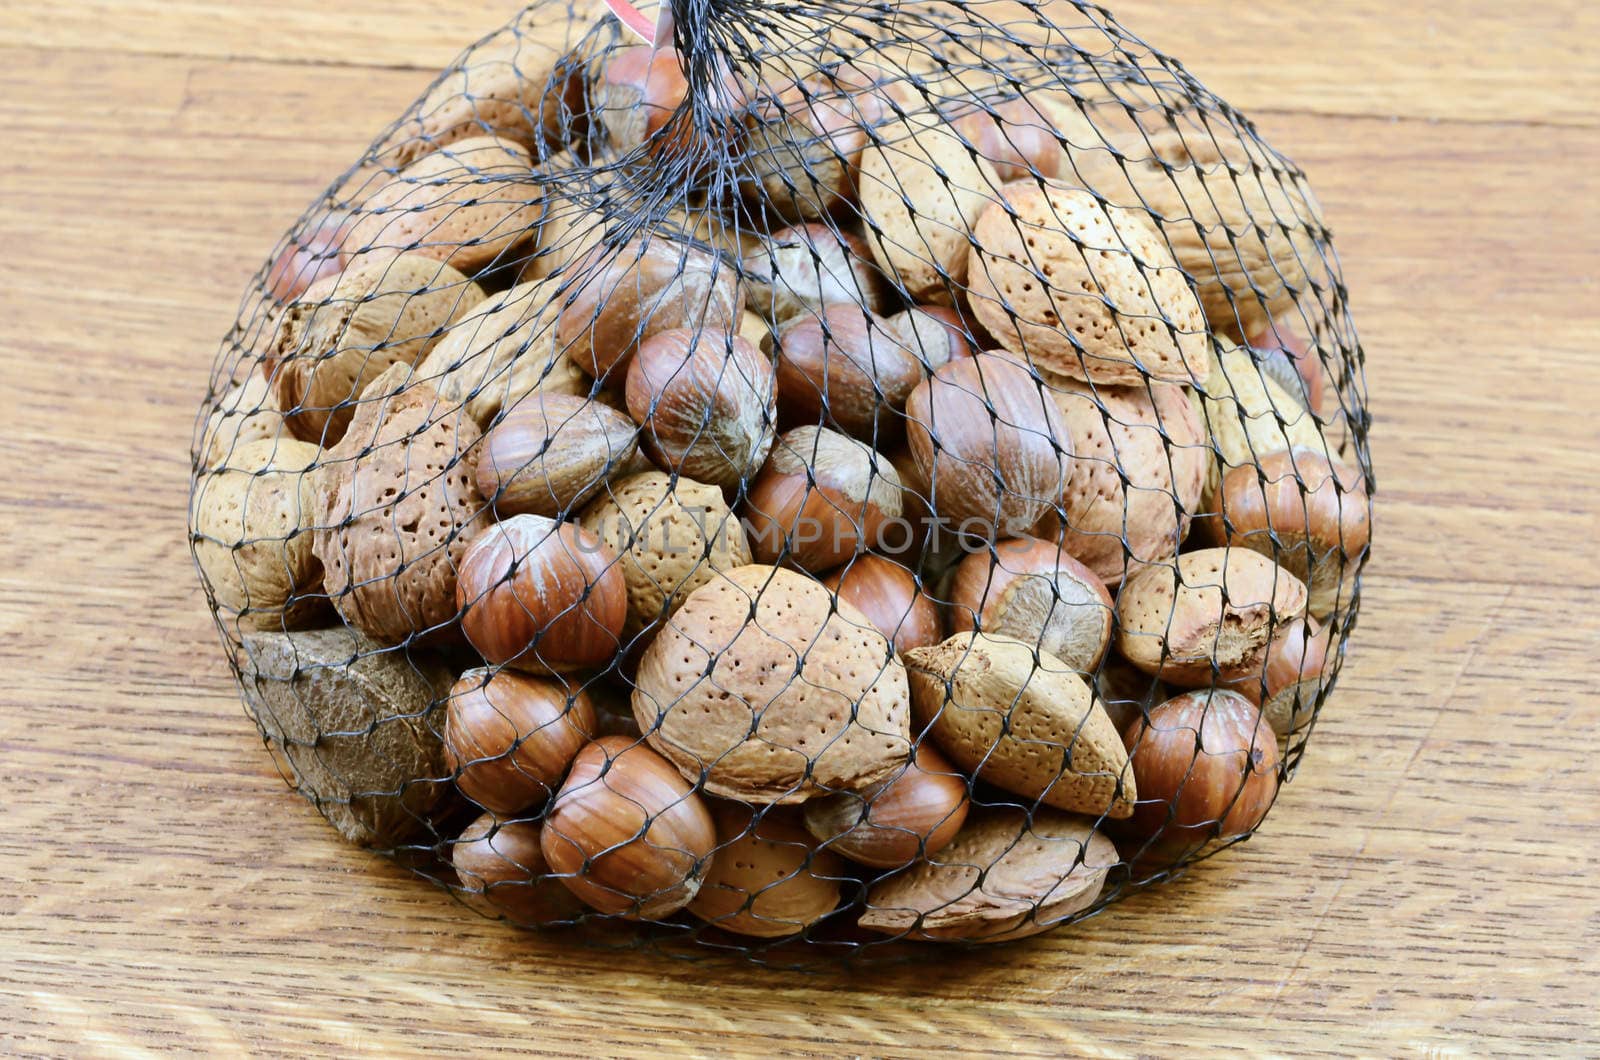 Mixed nuts on wooden background in net sack

